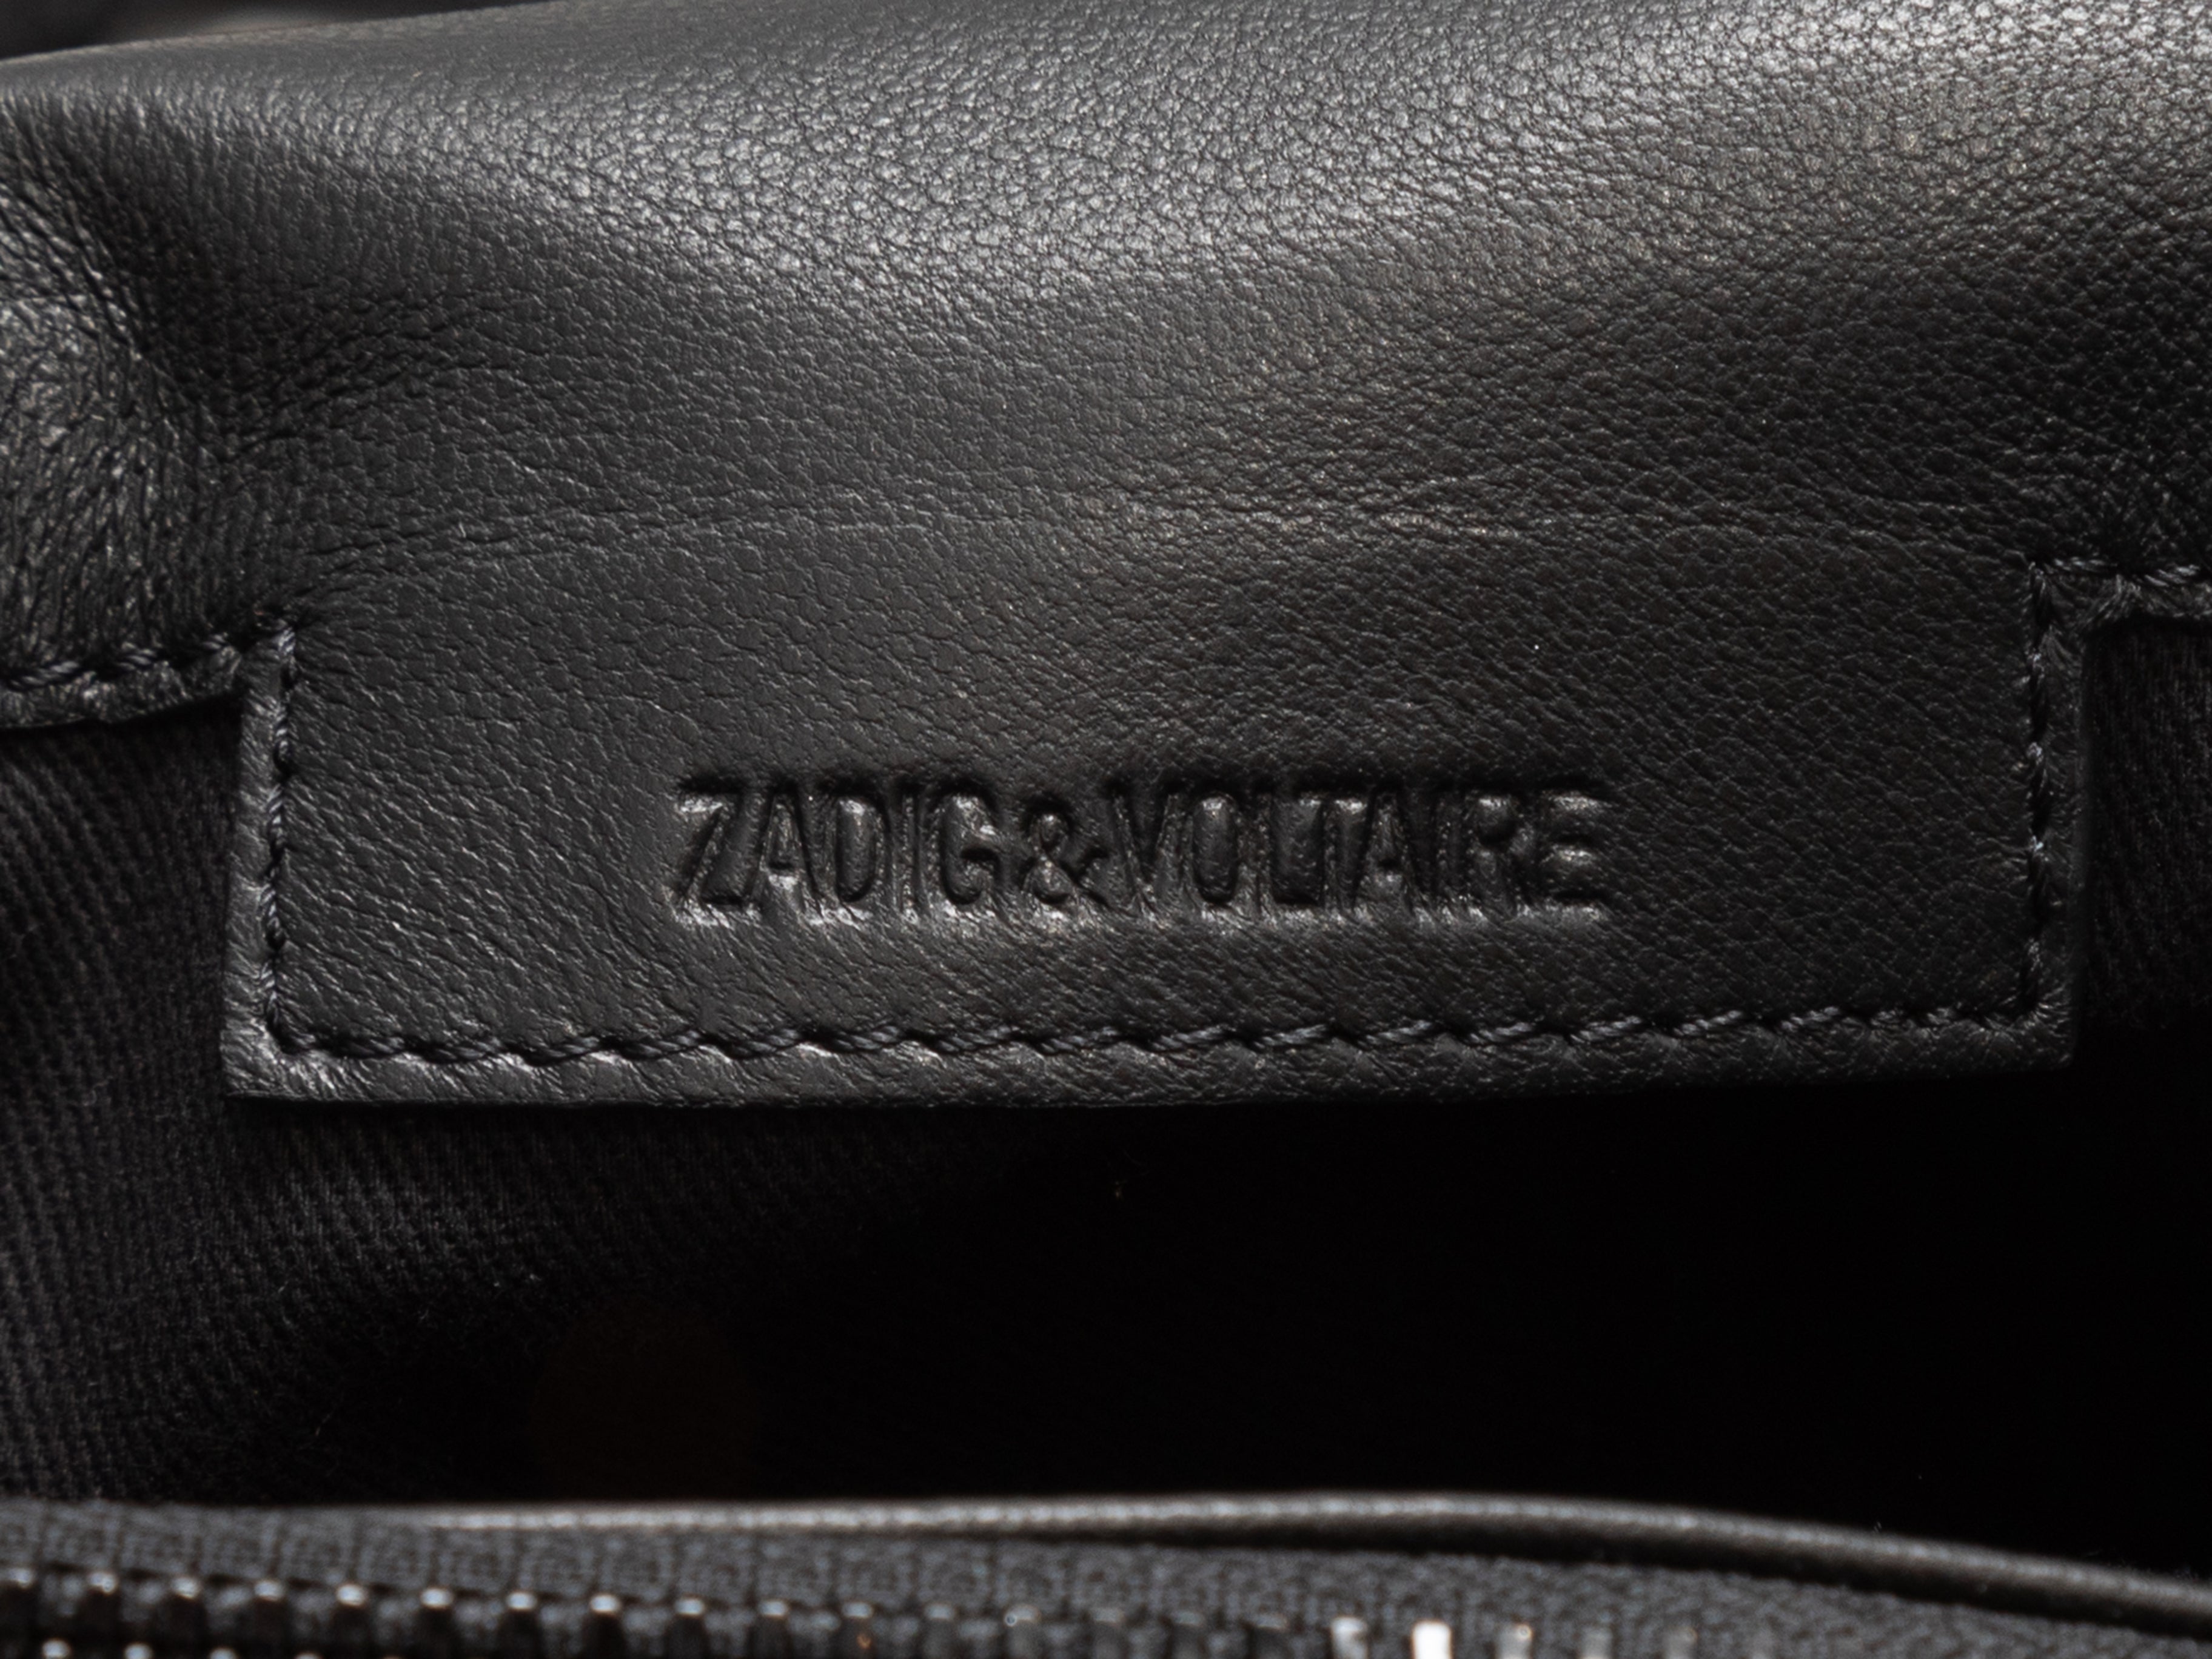 Zadig & Voltaire - Authenticated Rock Handbag - Leather Black for Women, Very Good Condition